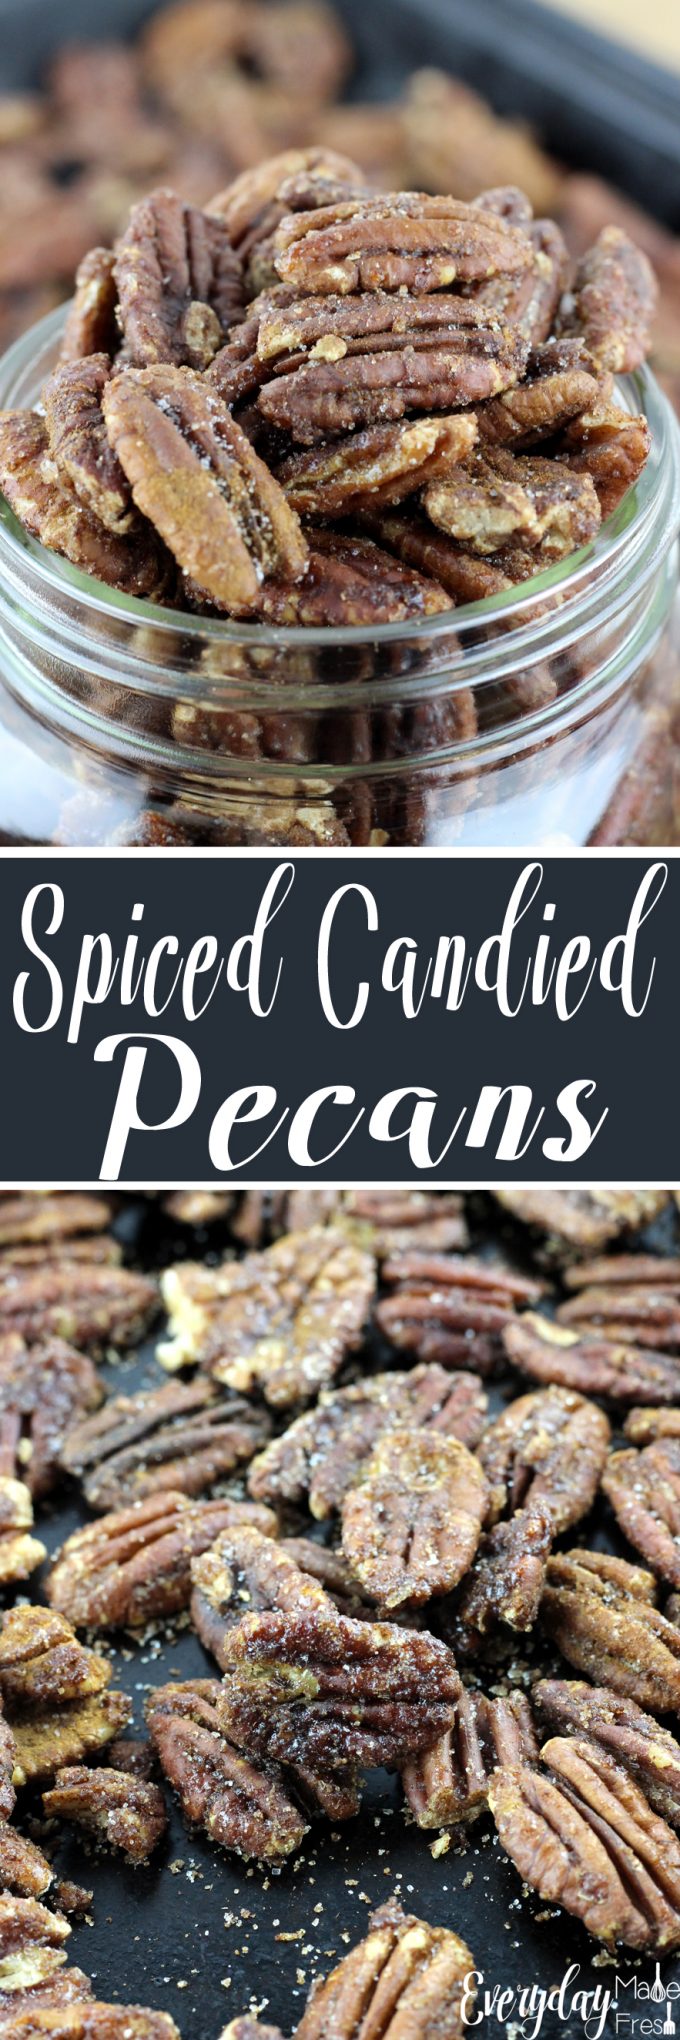 Spiced Candied Pecans are simple to make with just the right amount sweet, and not too spicy. They make the perfect snack or homemade gift! | EverydayMadeFresh.com